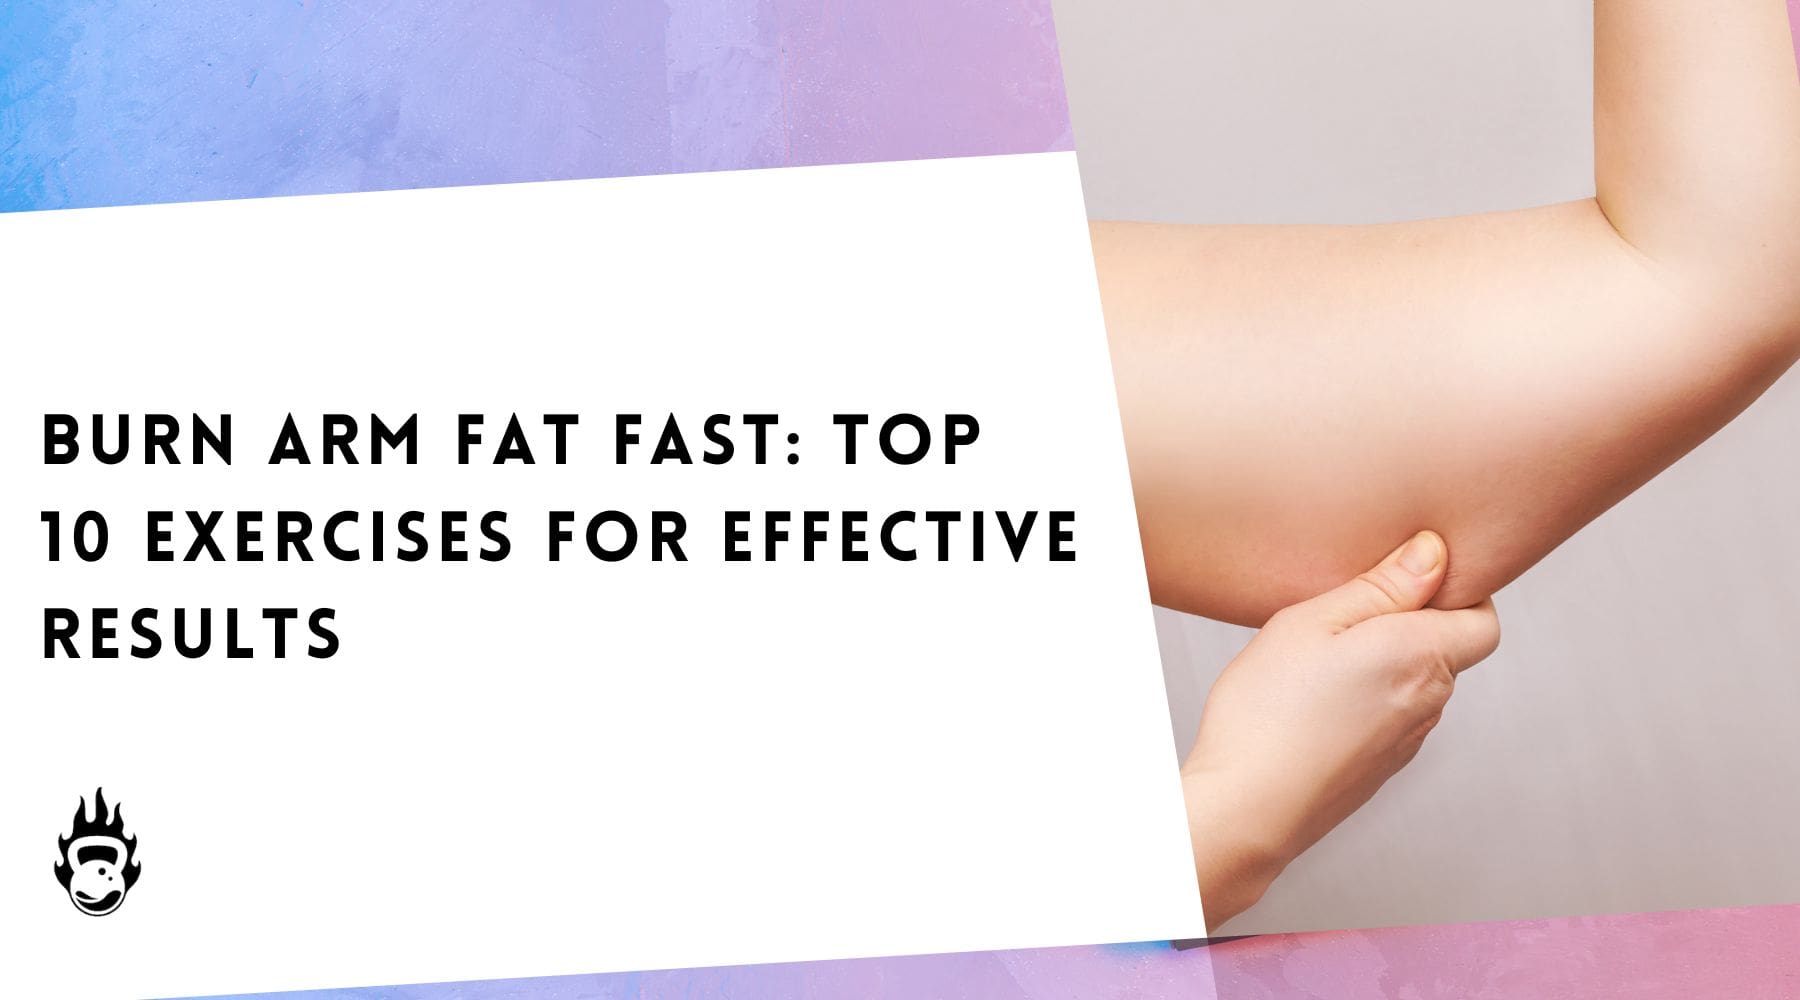 Burn Arm Fat Fast At Home: Top 10 Exercises for Effective Results –